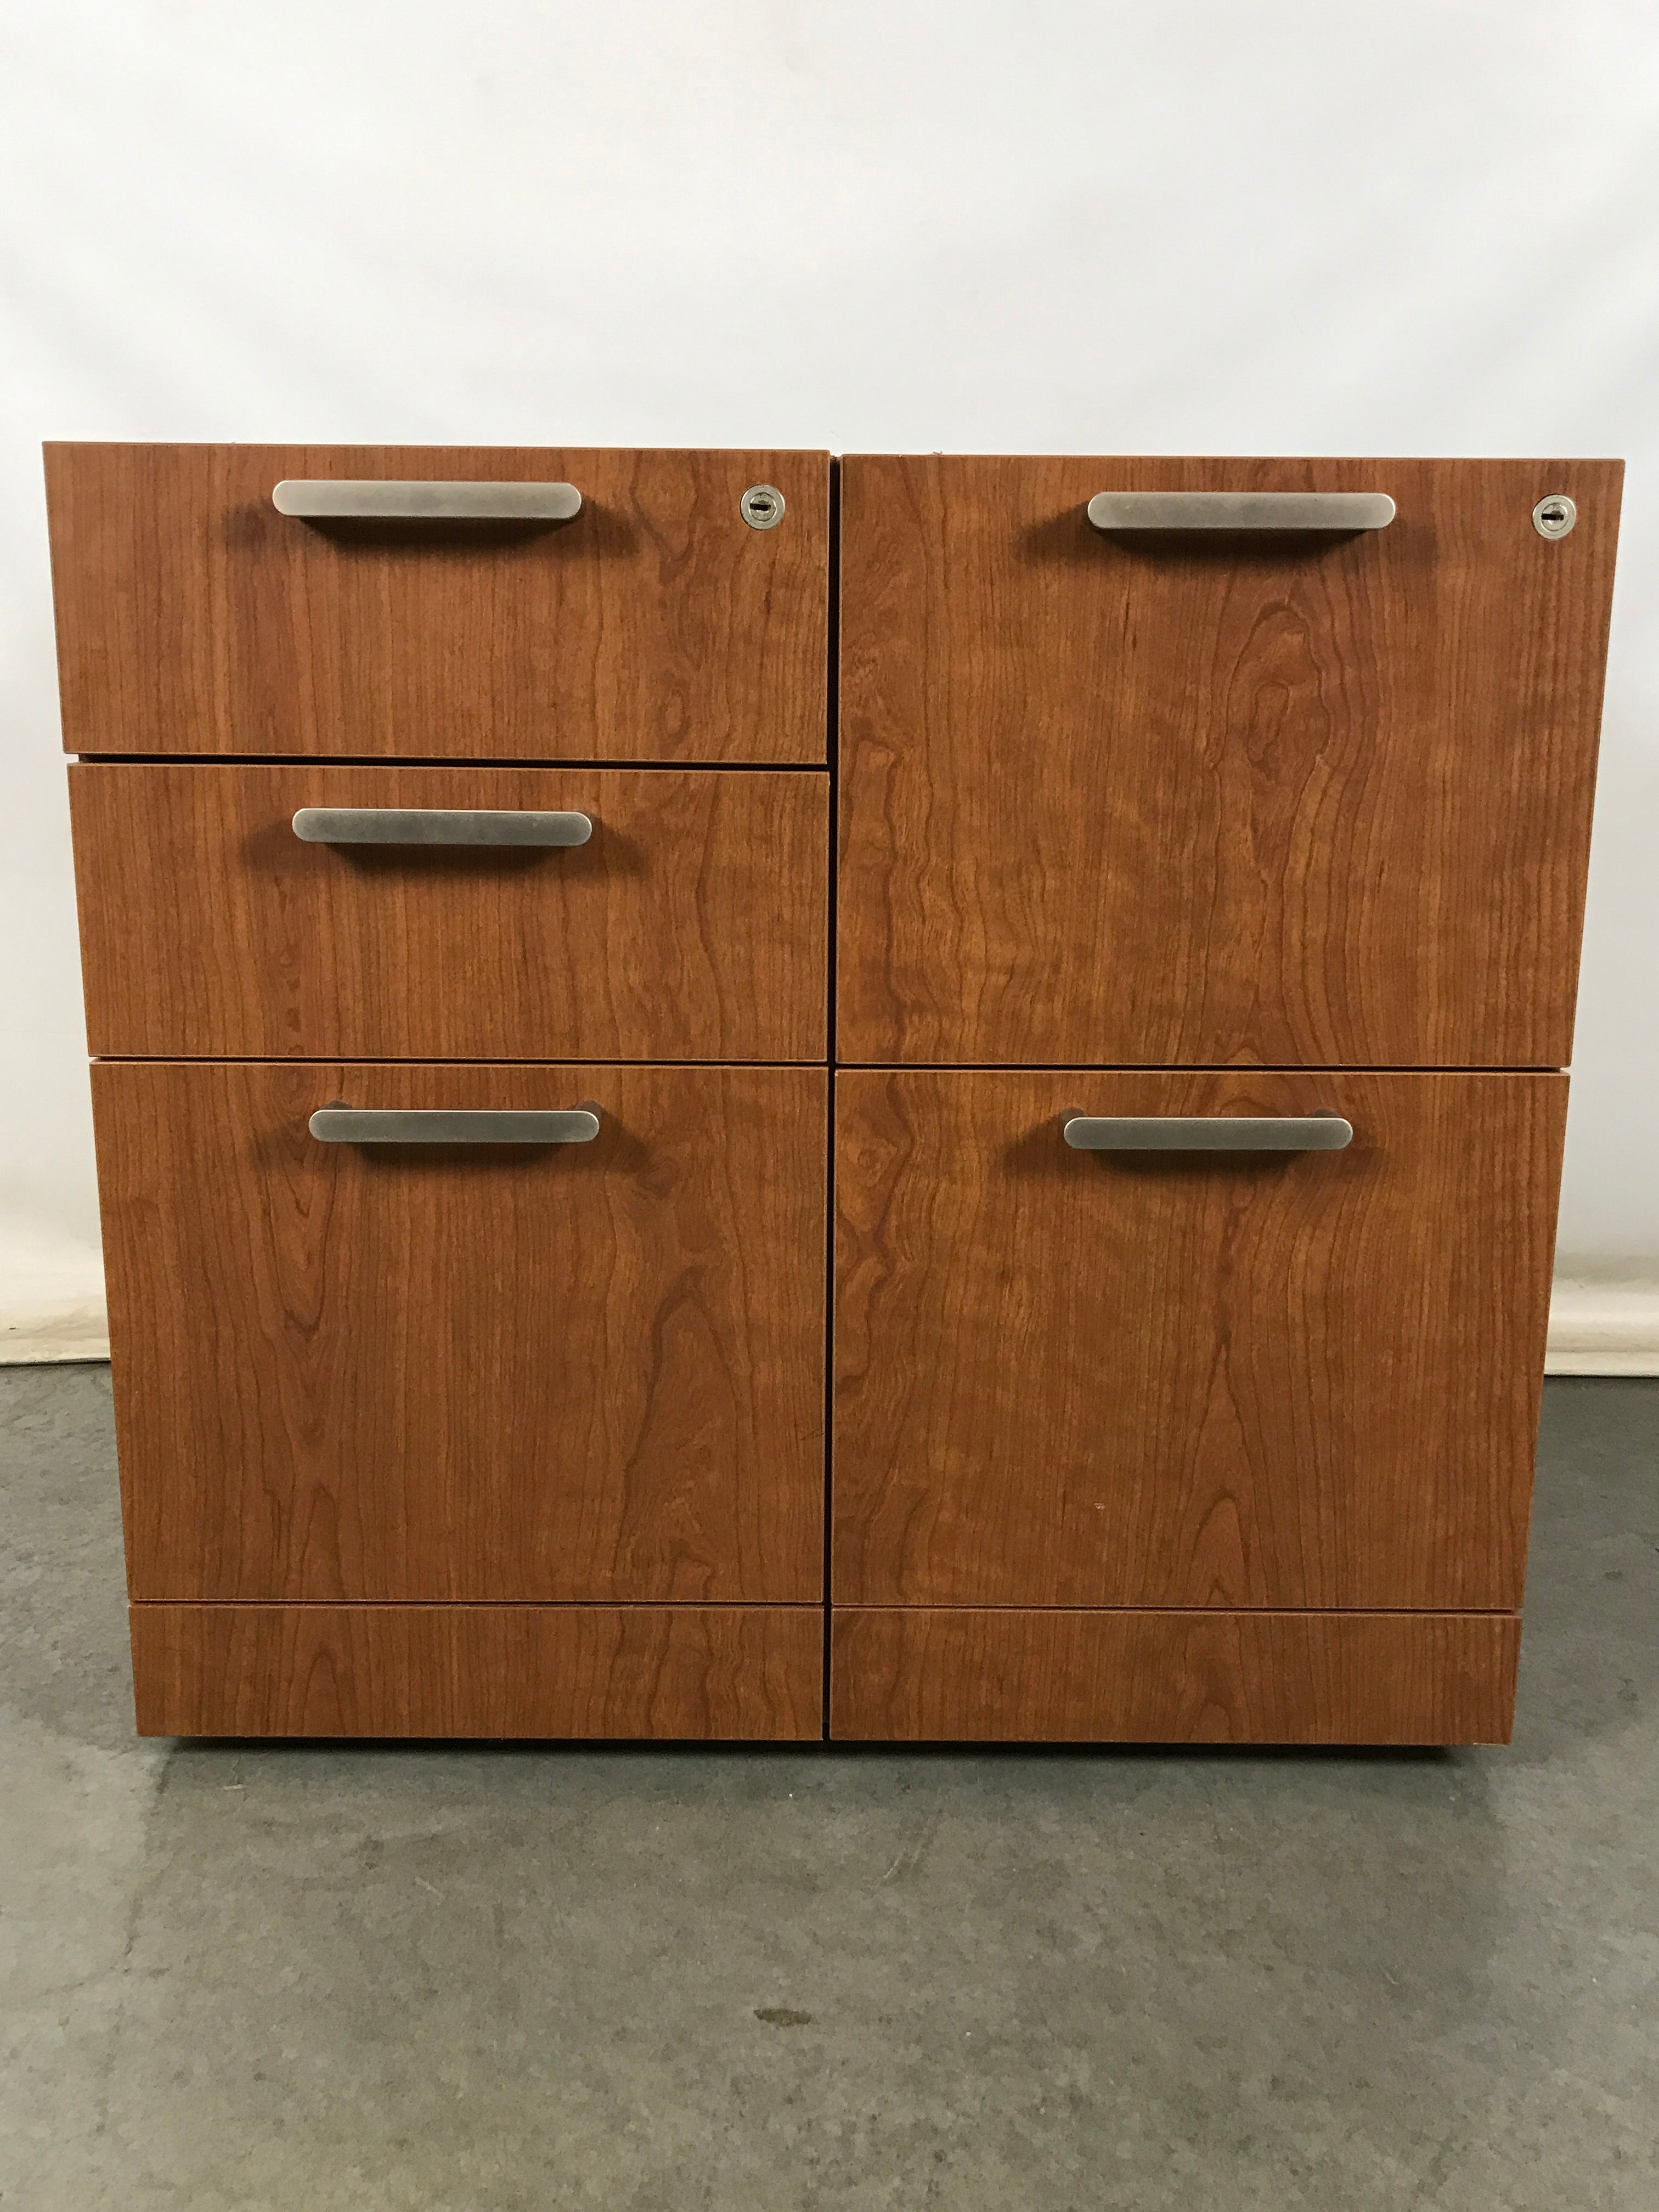 Steelcase Wooden Conjoined File Cabinet